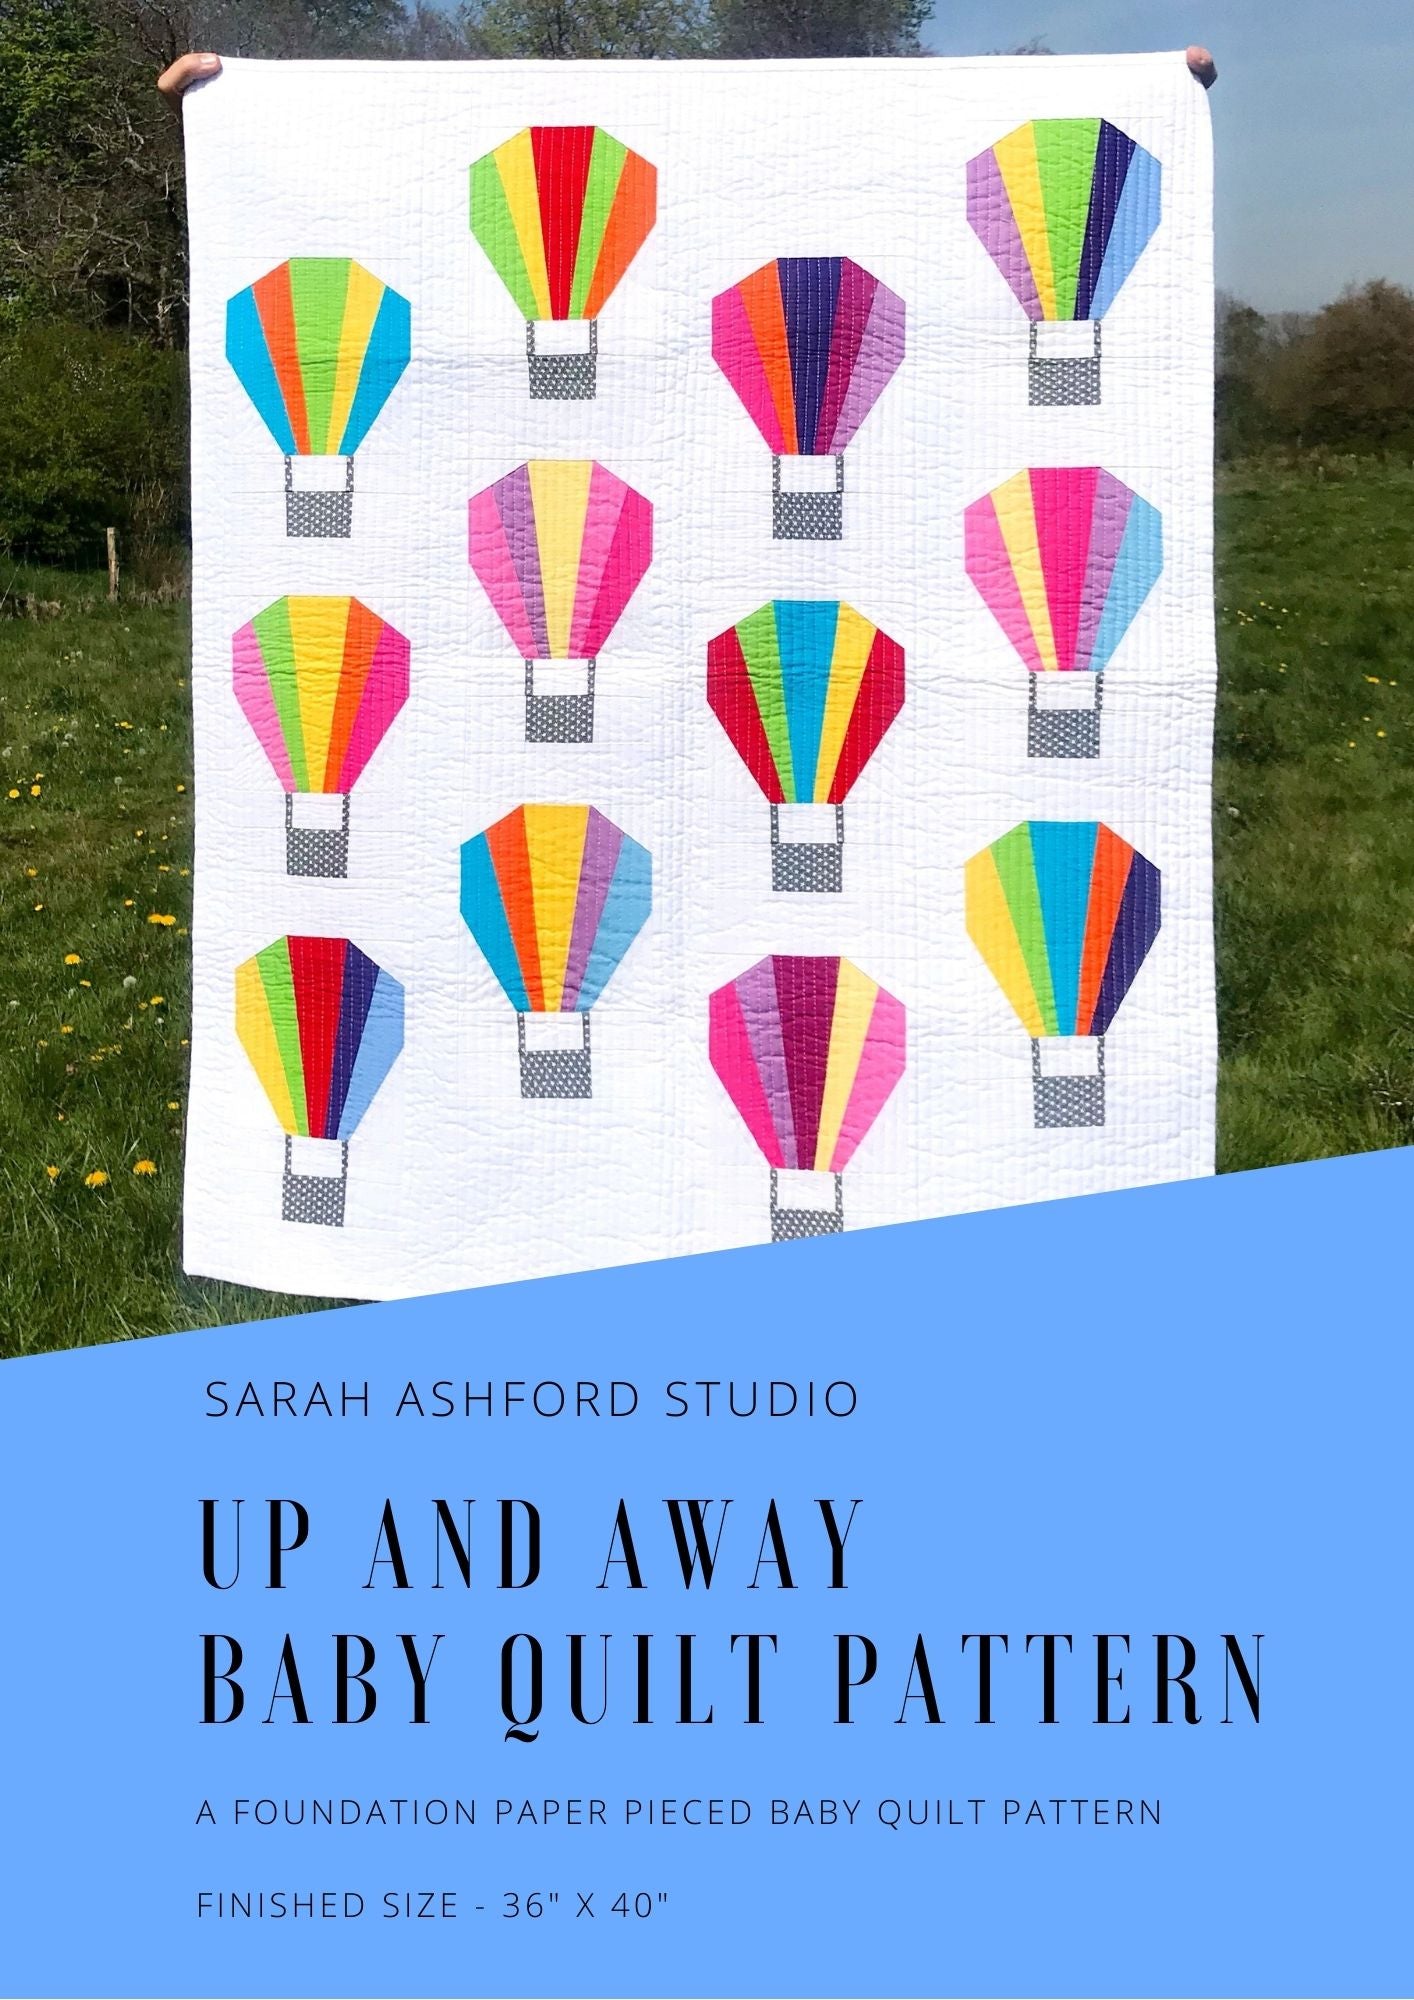 A baby quilt pattern. A baby quilt has a series of 12 hot air balloons, each made up of solid strips of colour against a backdrop of white. 